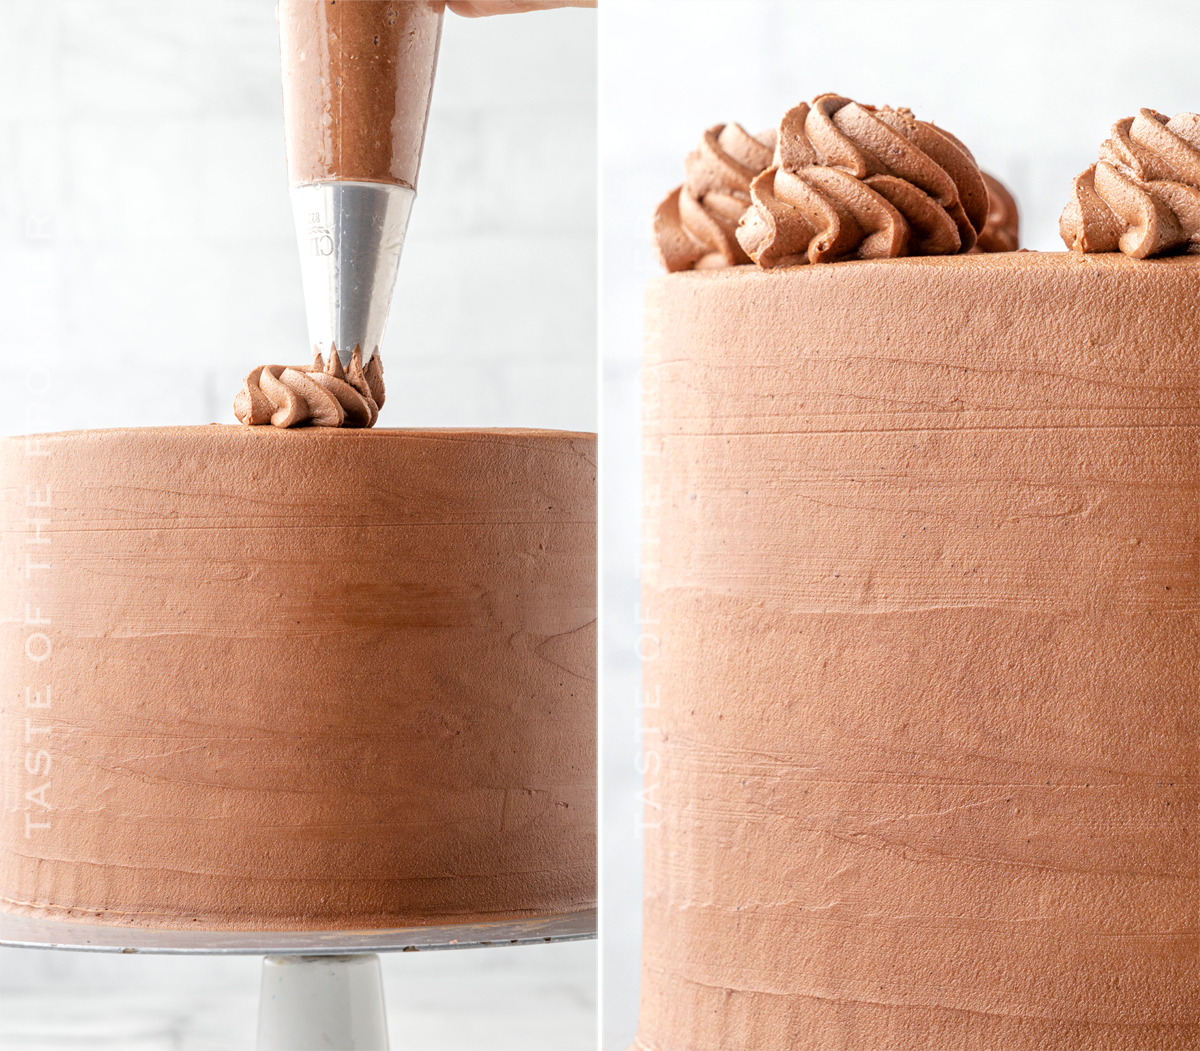 decorating with chocolate buttercream